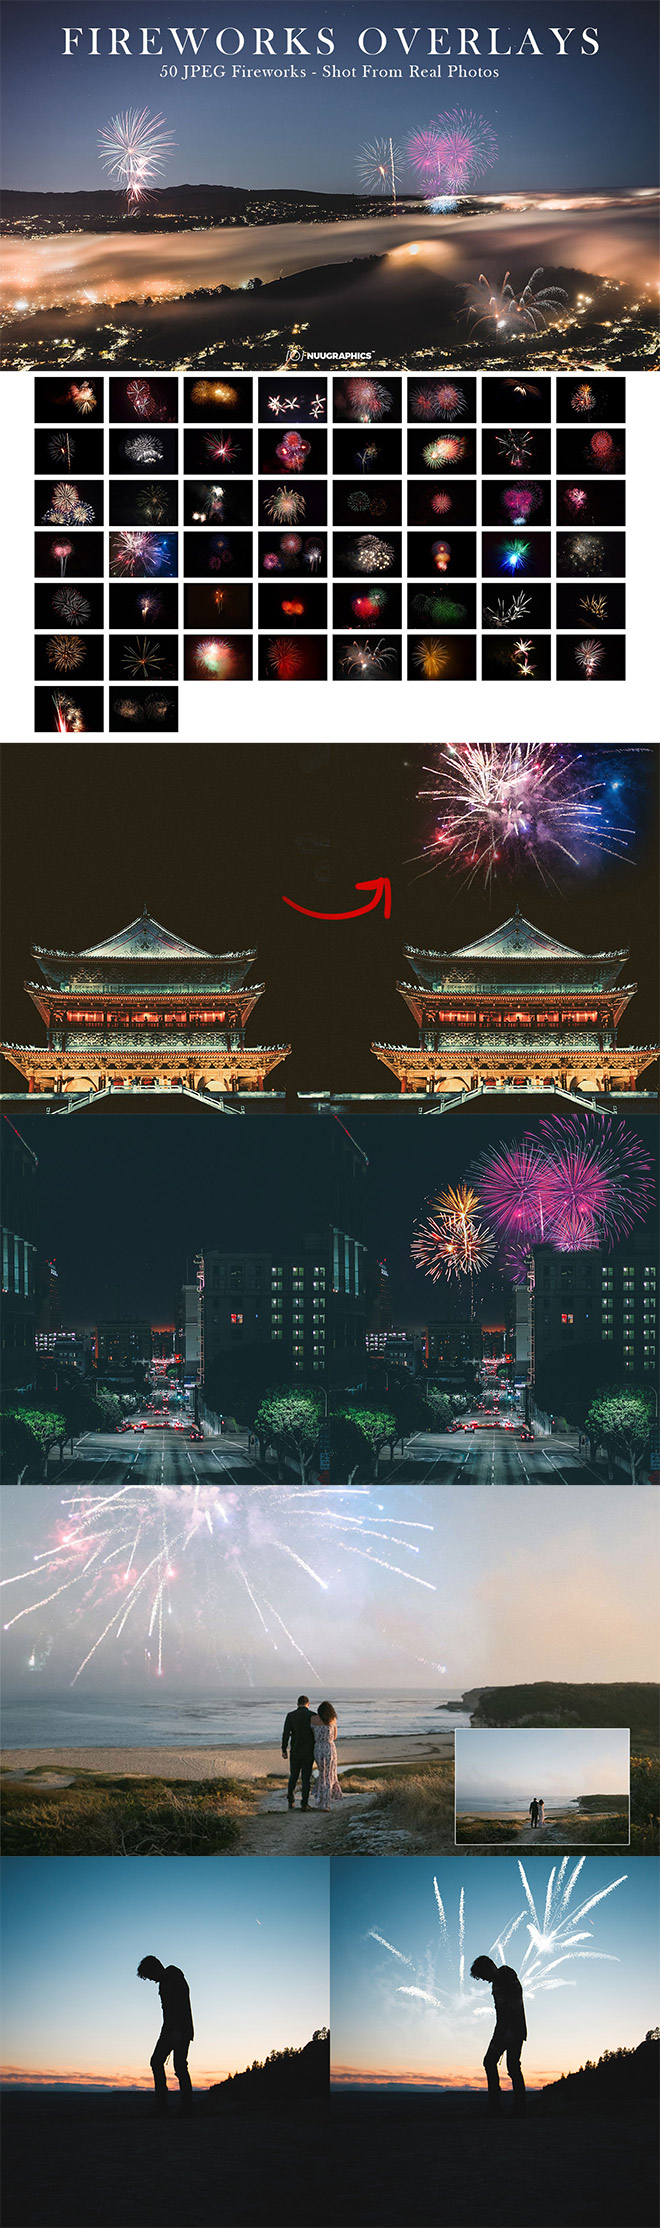 50 Fireworks Overlays for Photoshop